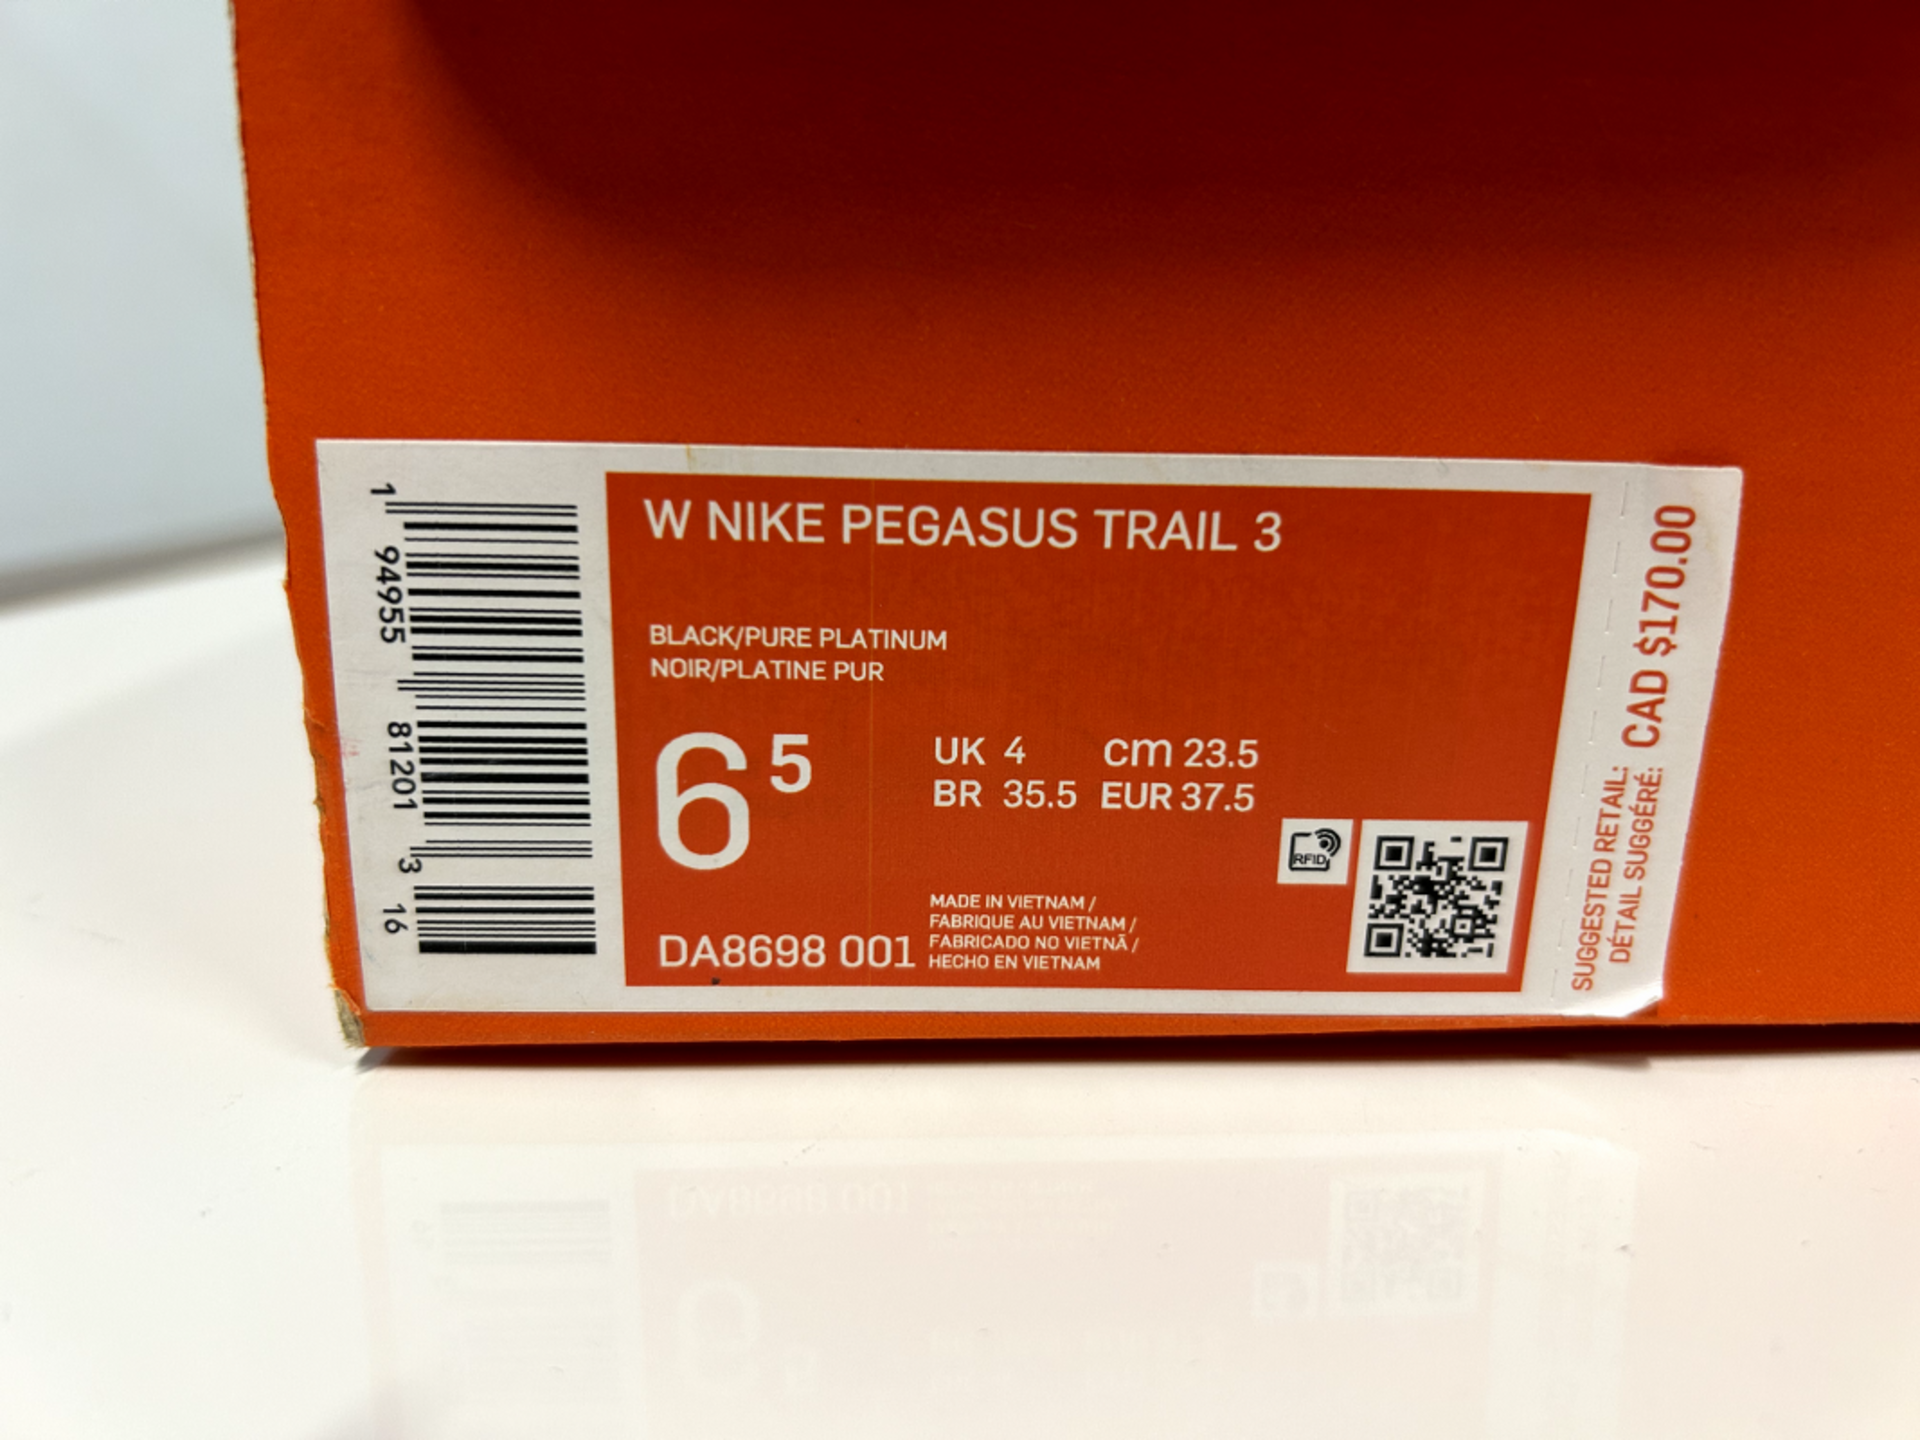 Nike - Women's Size 6.5 - Pegasus Trail 3 - QTY: 1 - Approx. MSRP $190.00 CAD - Image 2 of 2